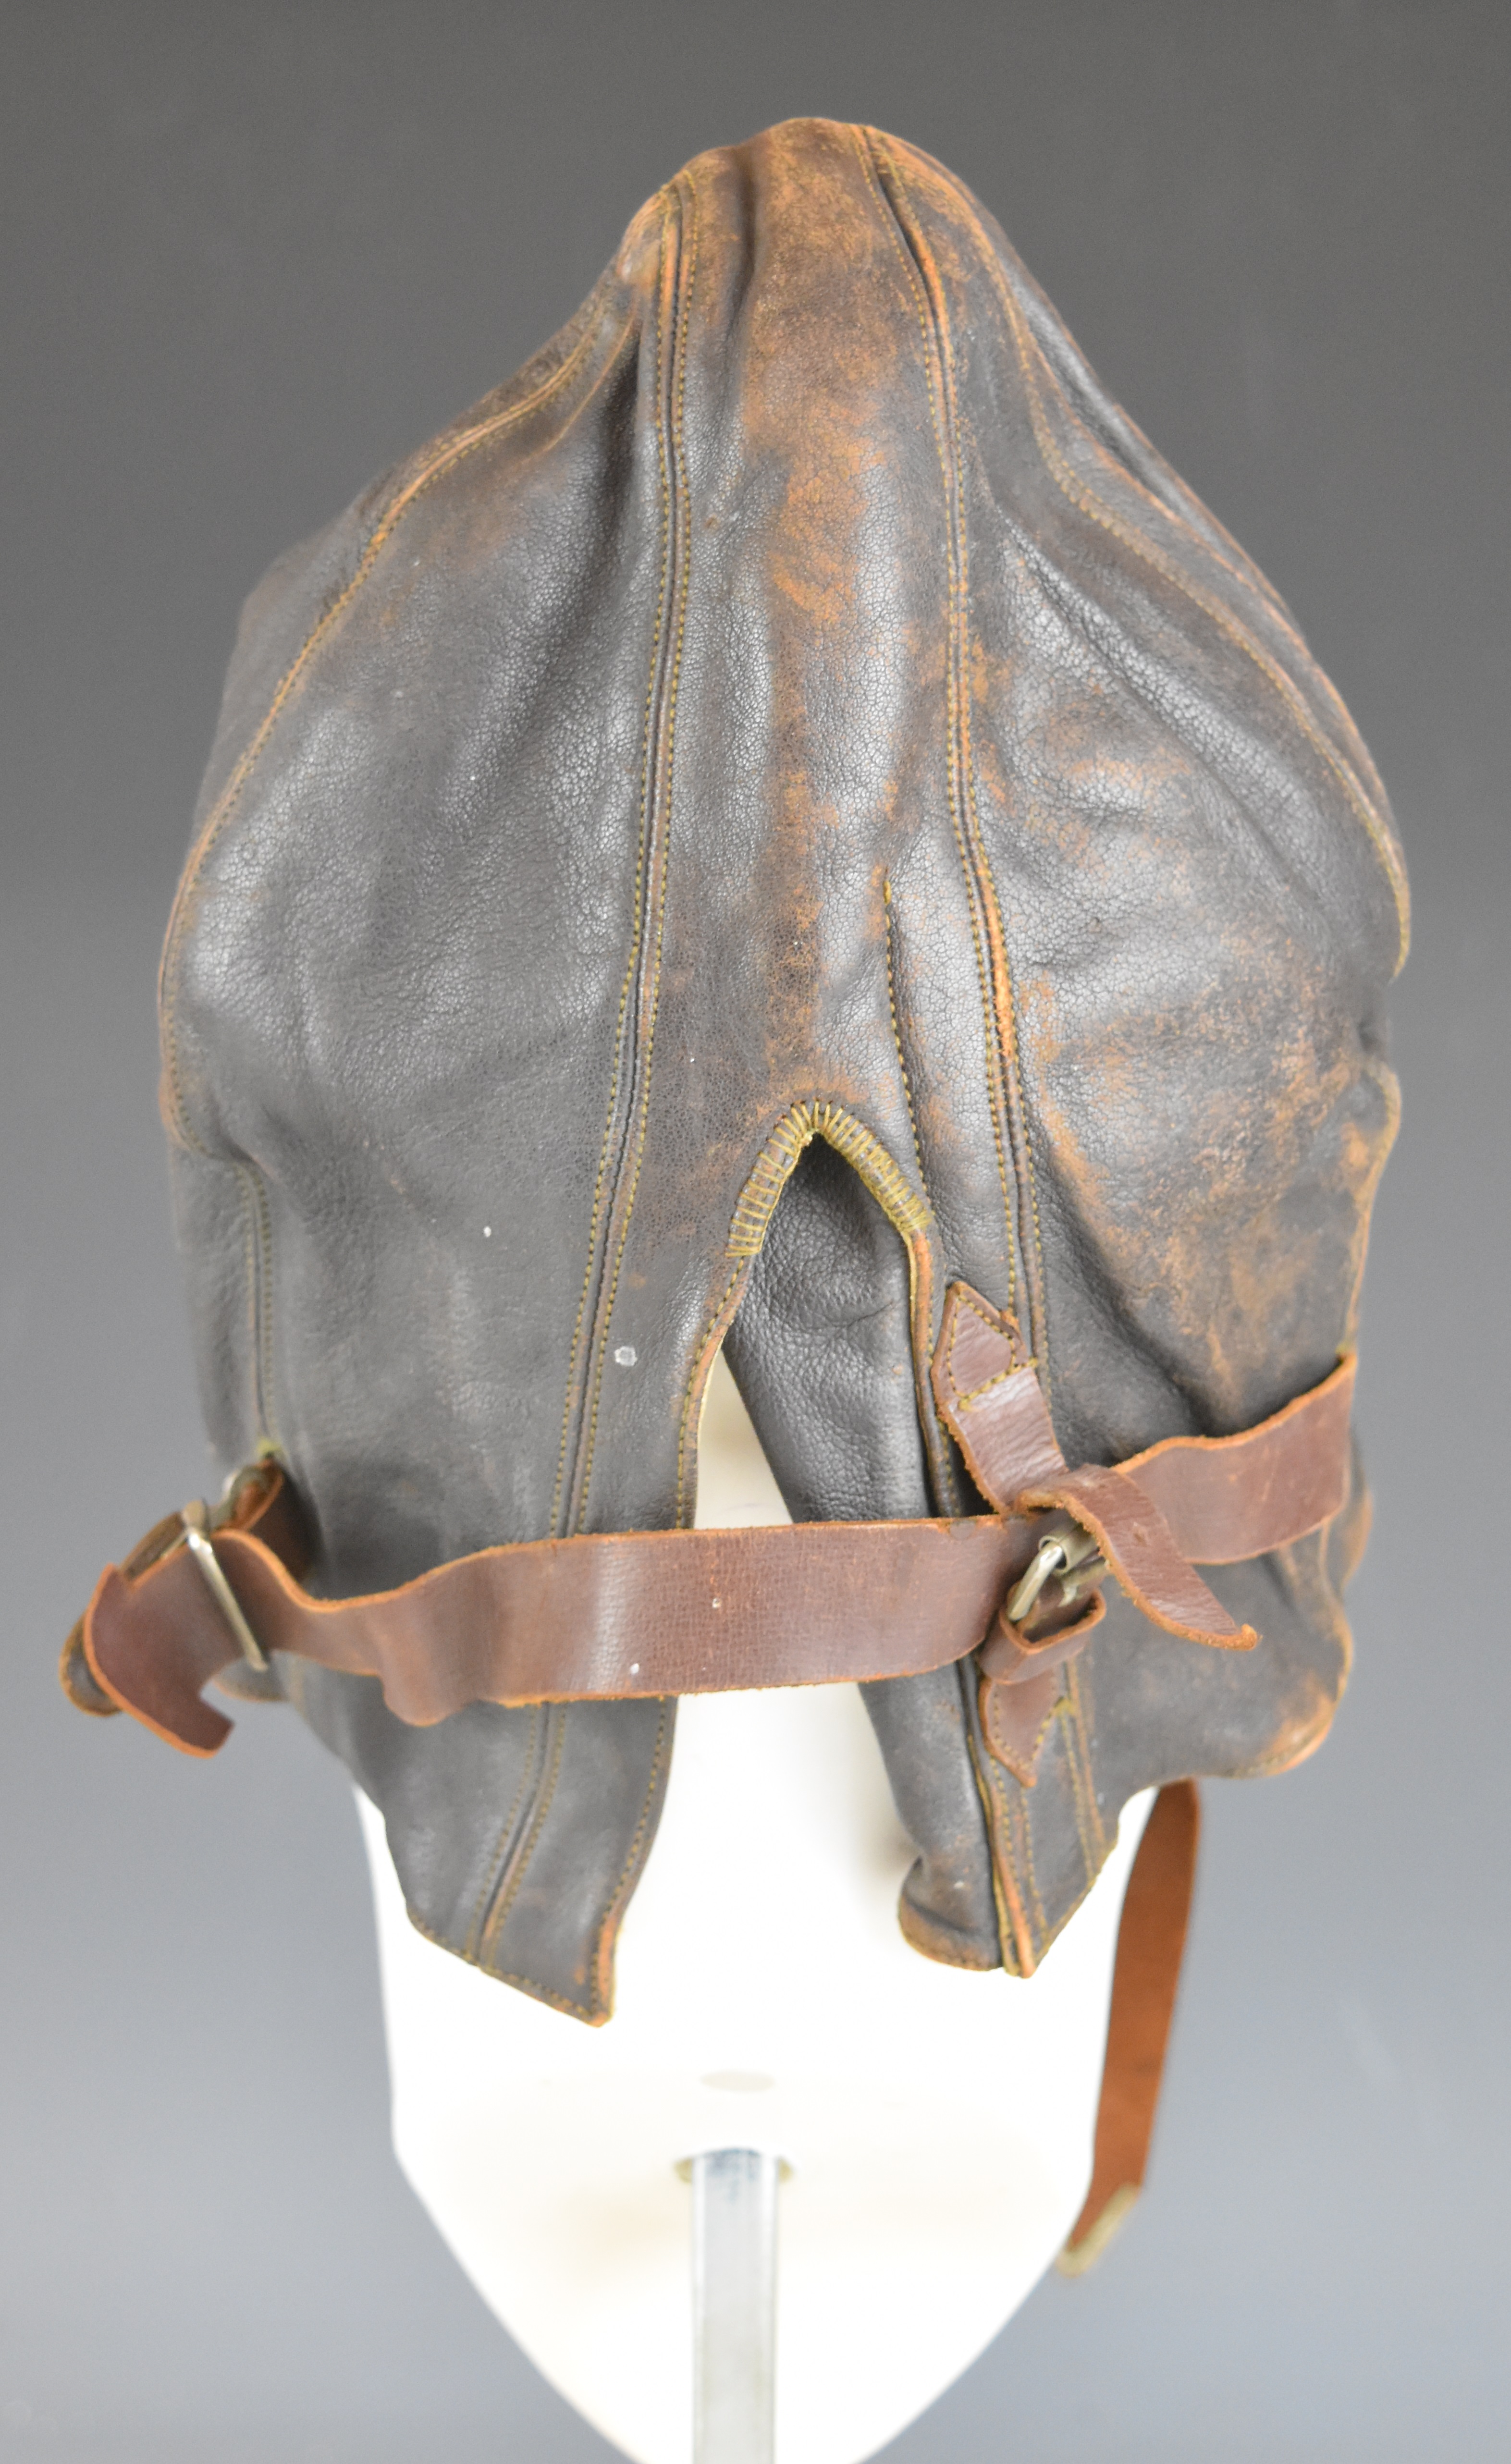 British WW2 leather flying helmet stamped AM 226/65 with label Wareings, Northampton, No 1, size - Image 3 of 8